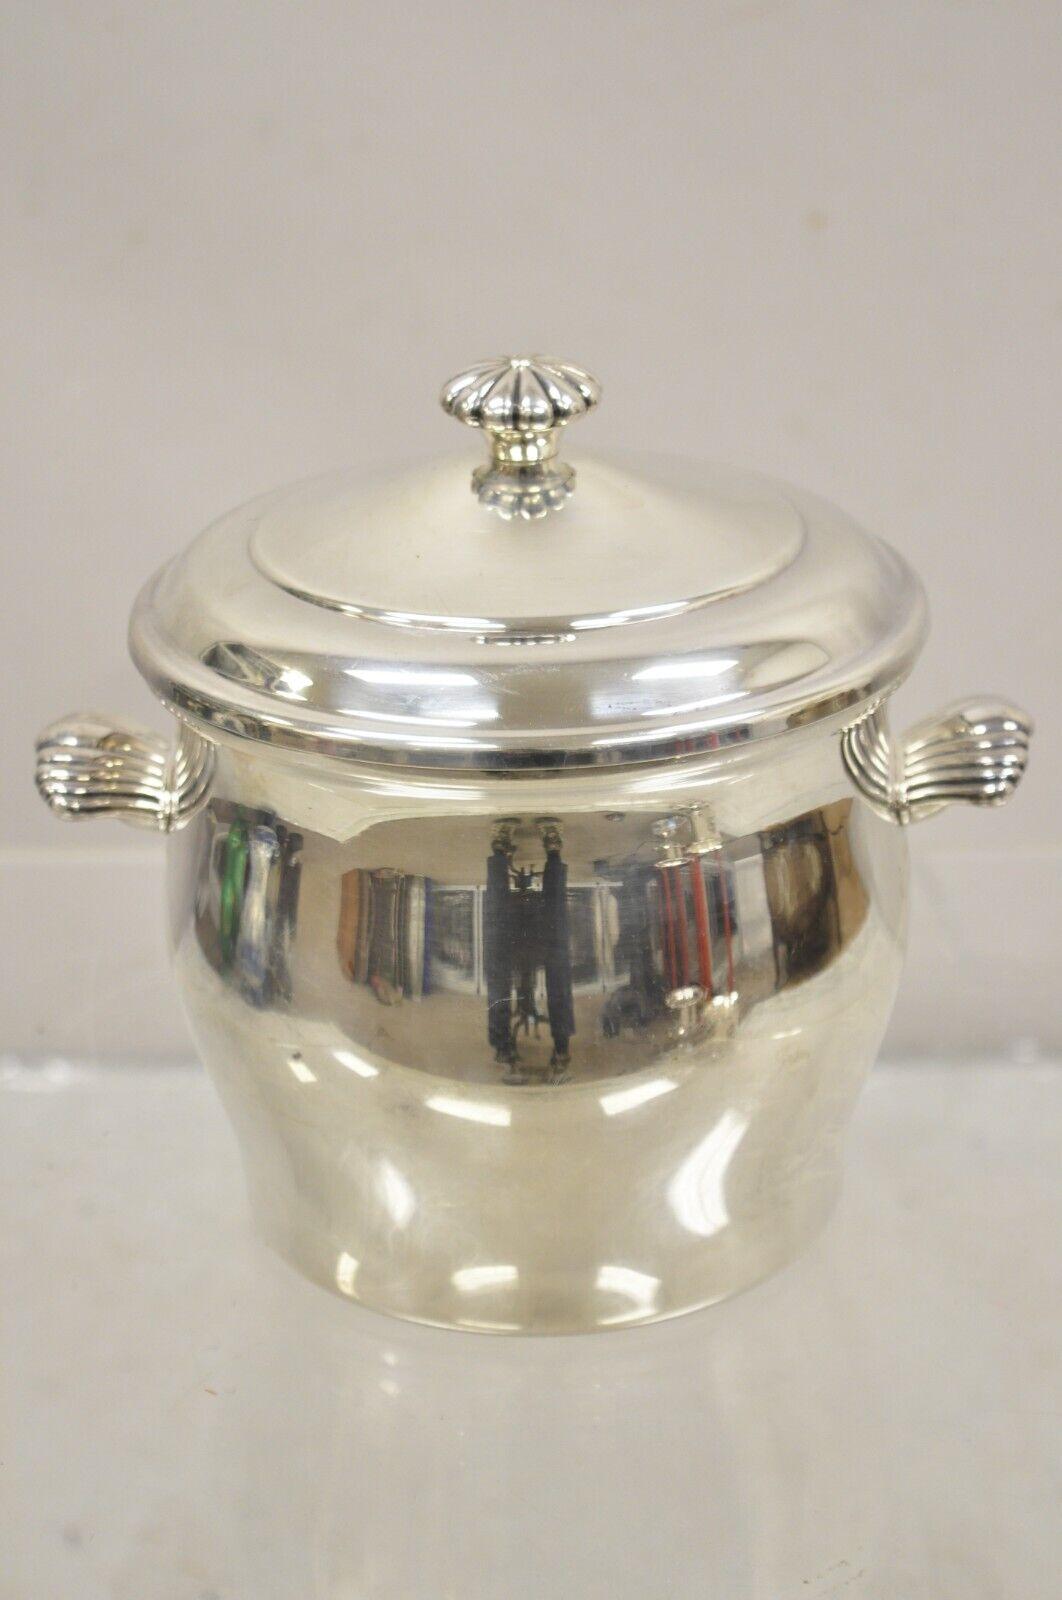 WM Rogers & Son Paul Revere 27 Silver Plated Lidded Ice Bucket. Item features leafy twin handles, glass liner, clean modernist lines, original hallmark. Circa Mid 20th Century. Measurements: 8